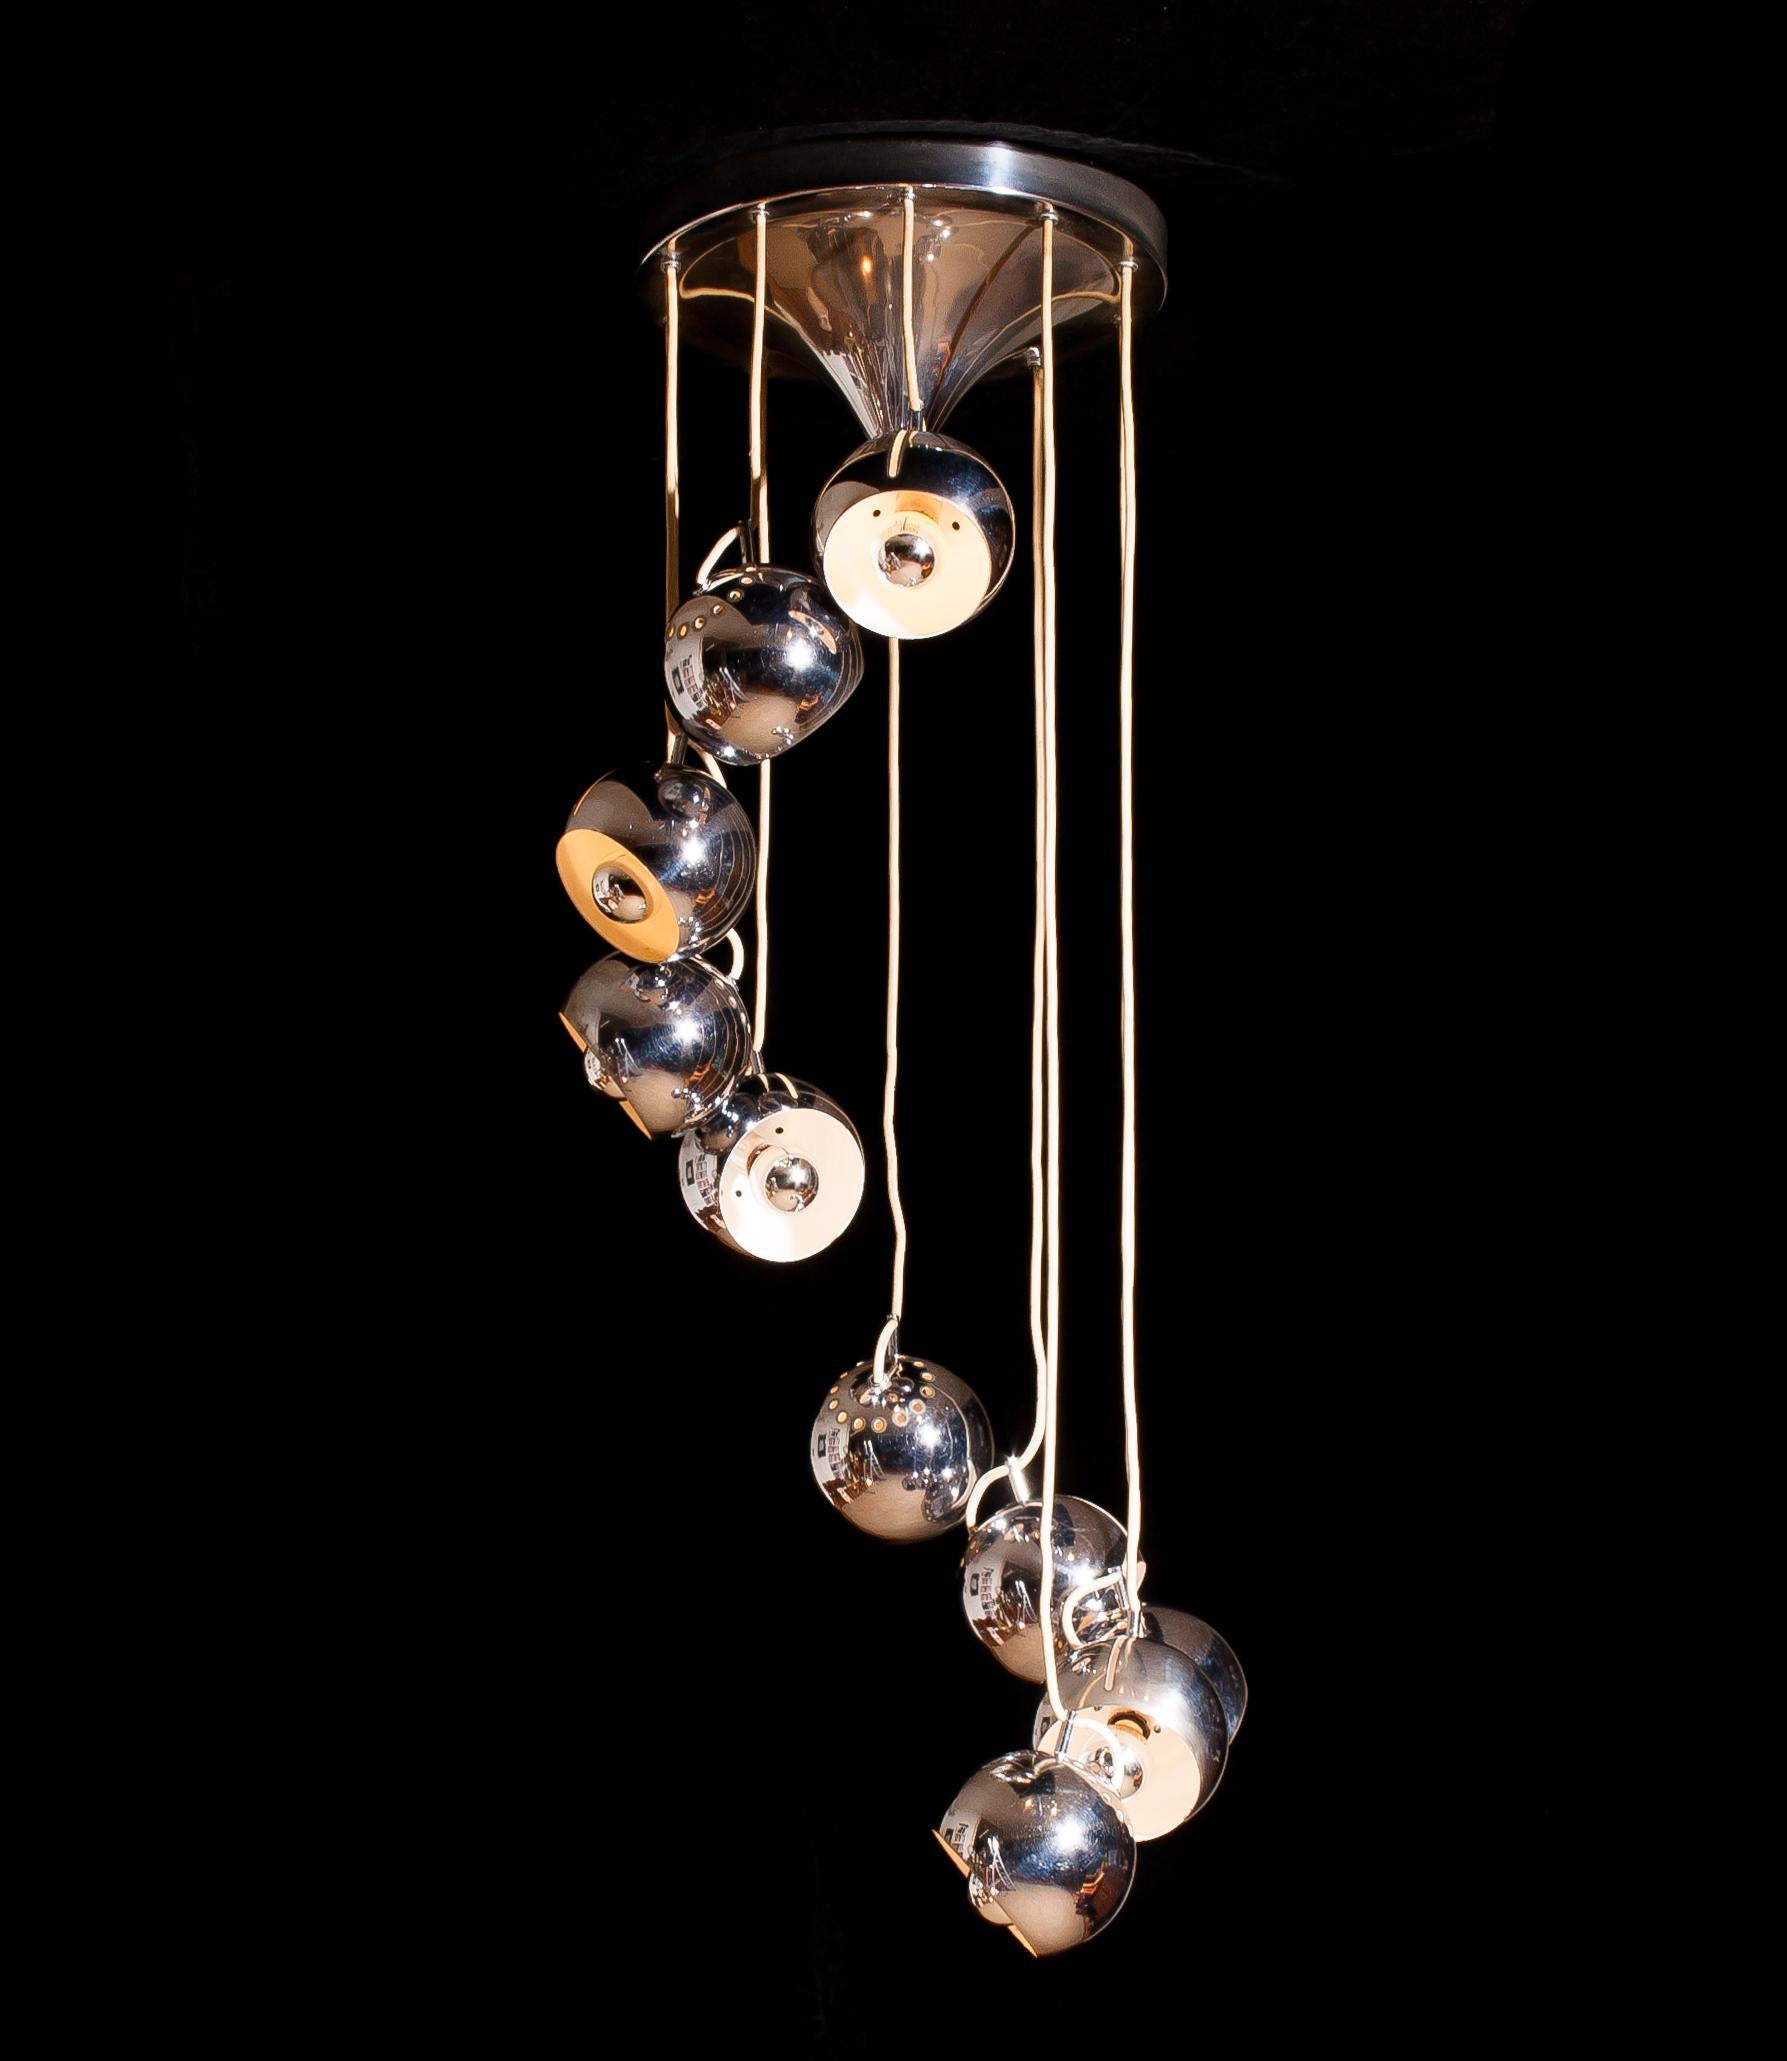 Space Age 1960s, Chromed Waterfall Chandelier with Adjustable Globes by Lampadari Reggiani